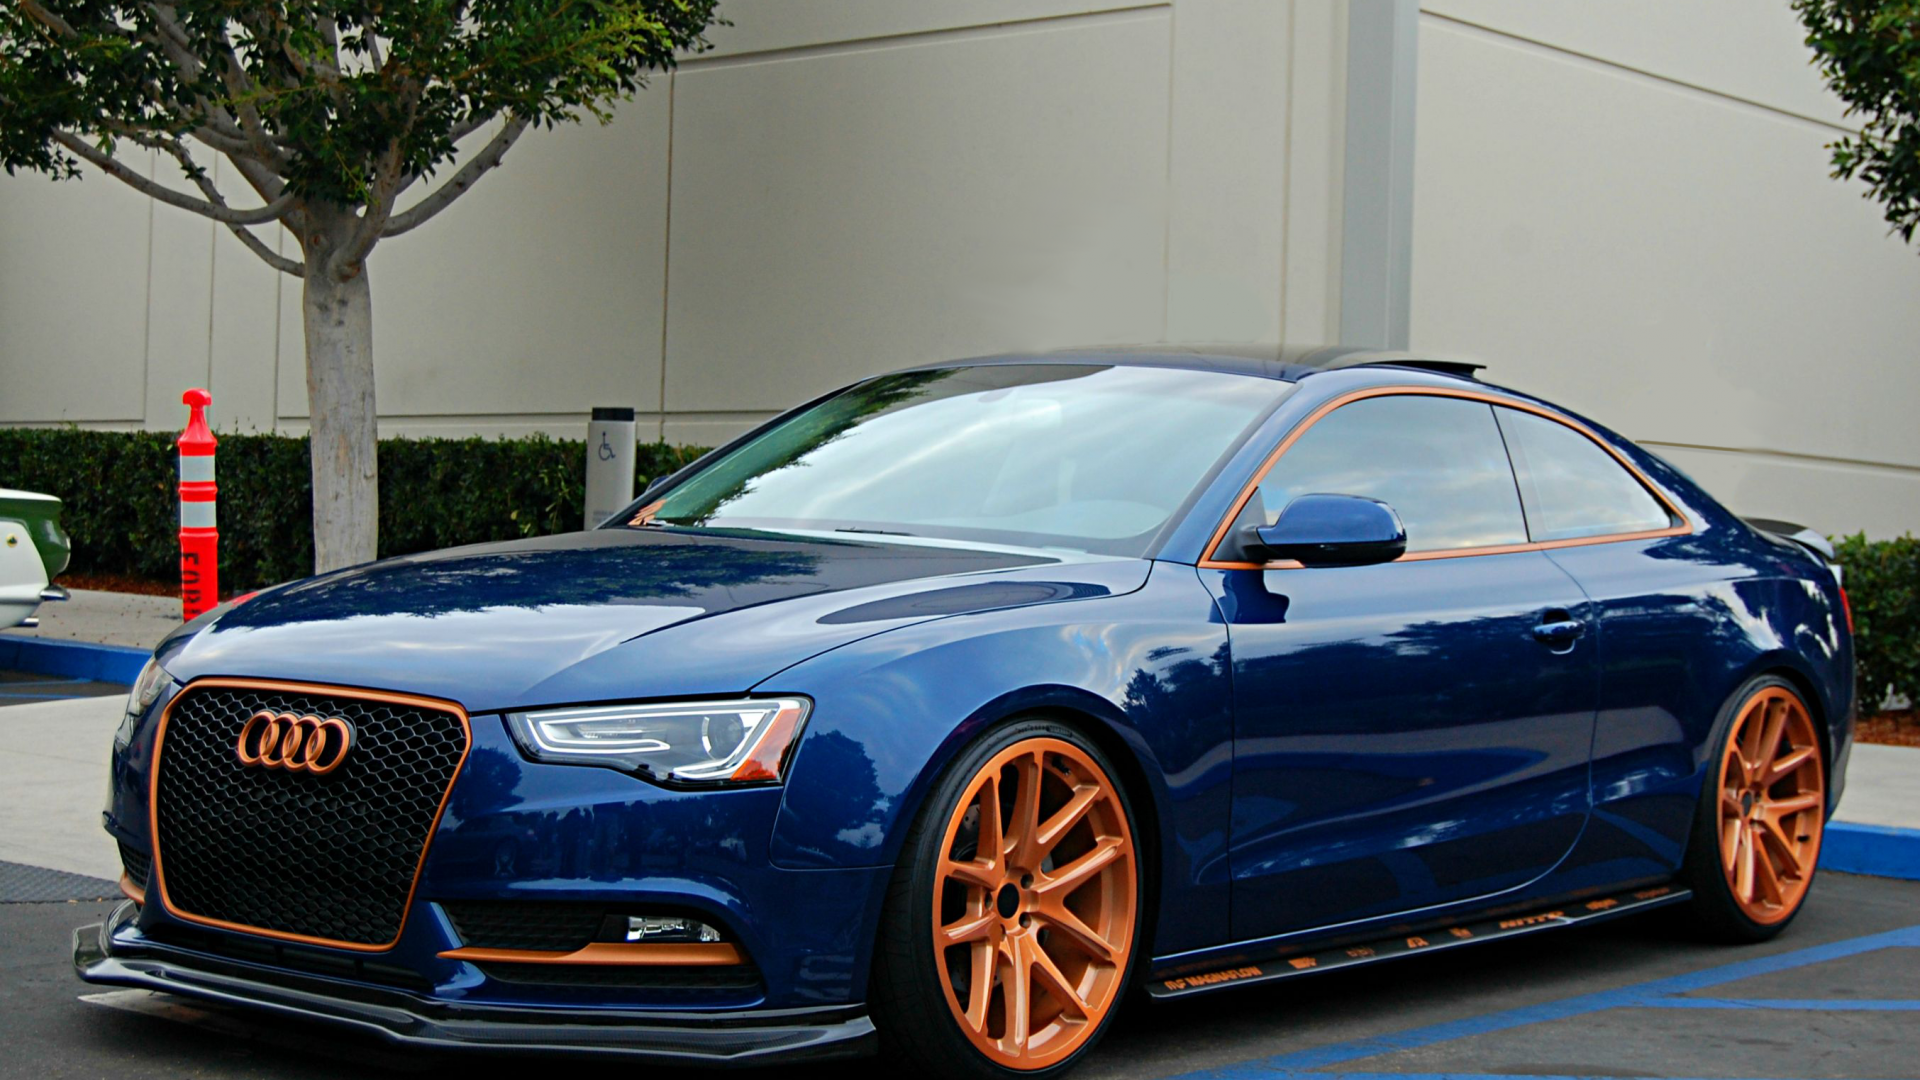 Audi A5 Coupe, Blue, Side View, Luxury, Cars, Modified - Audi A5 Coupe Modified - HD Wallpaper 